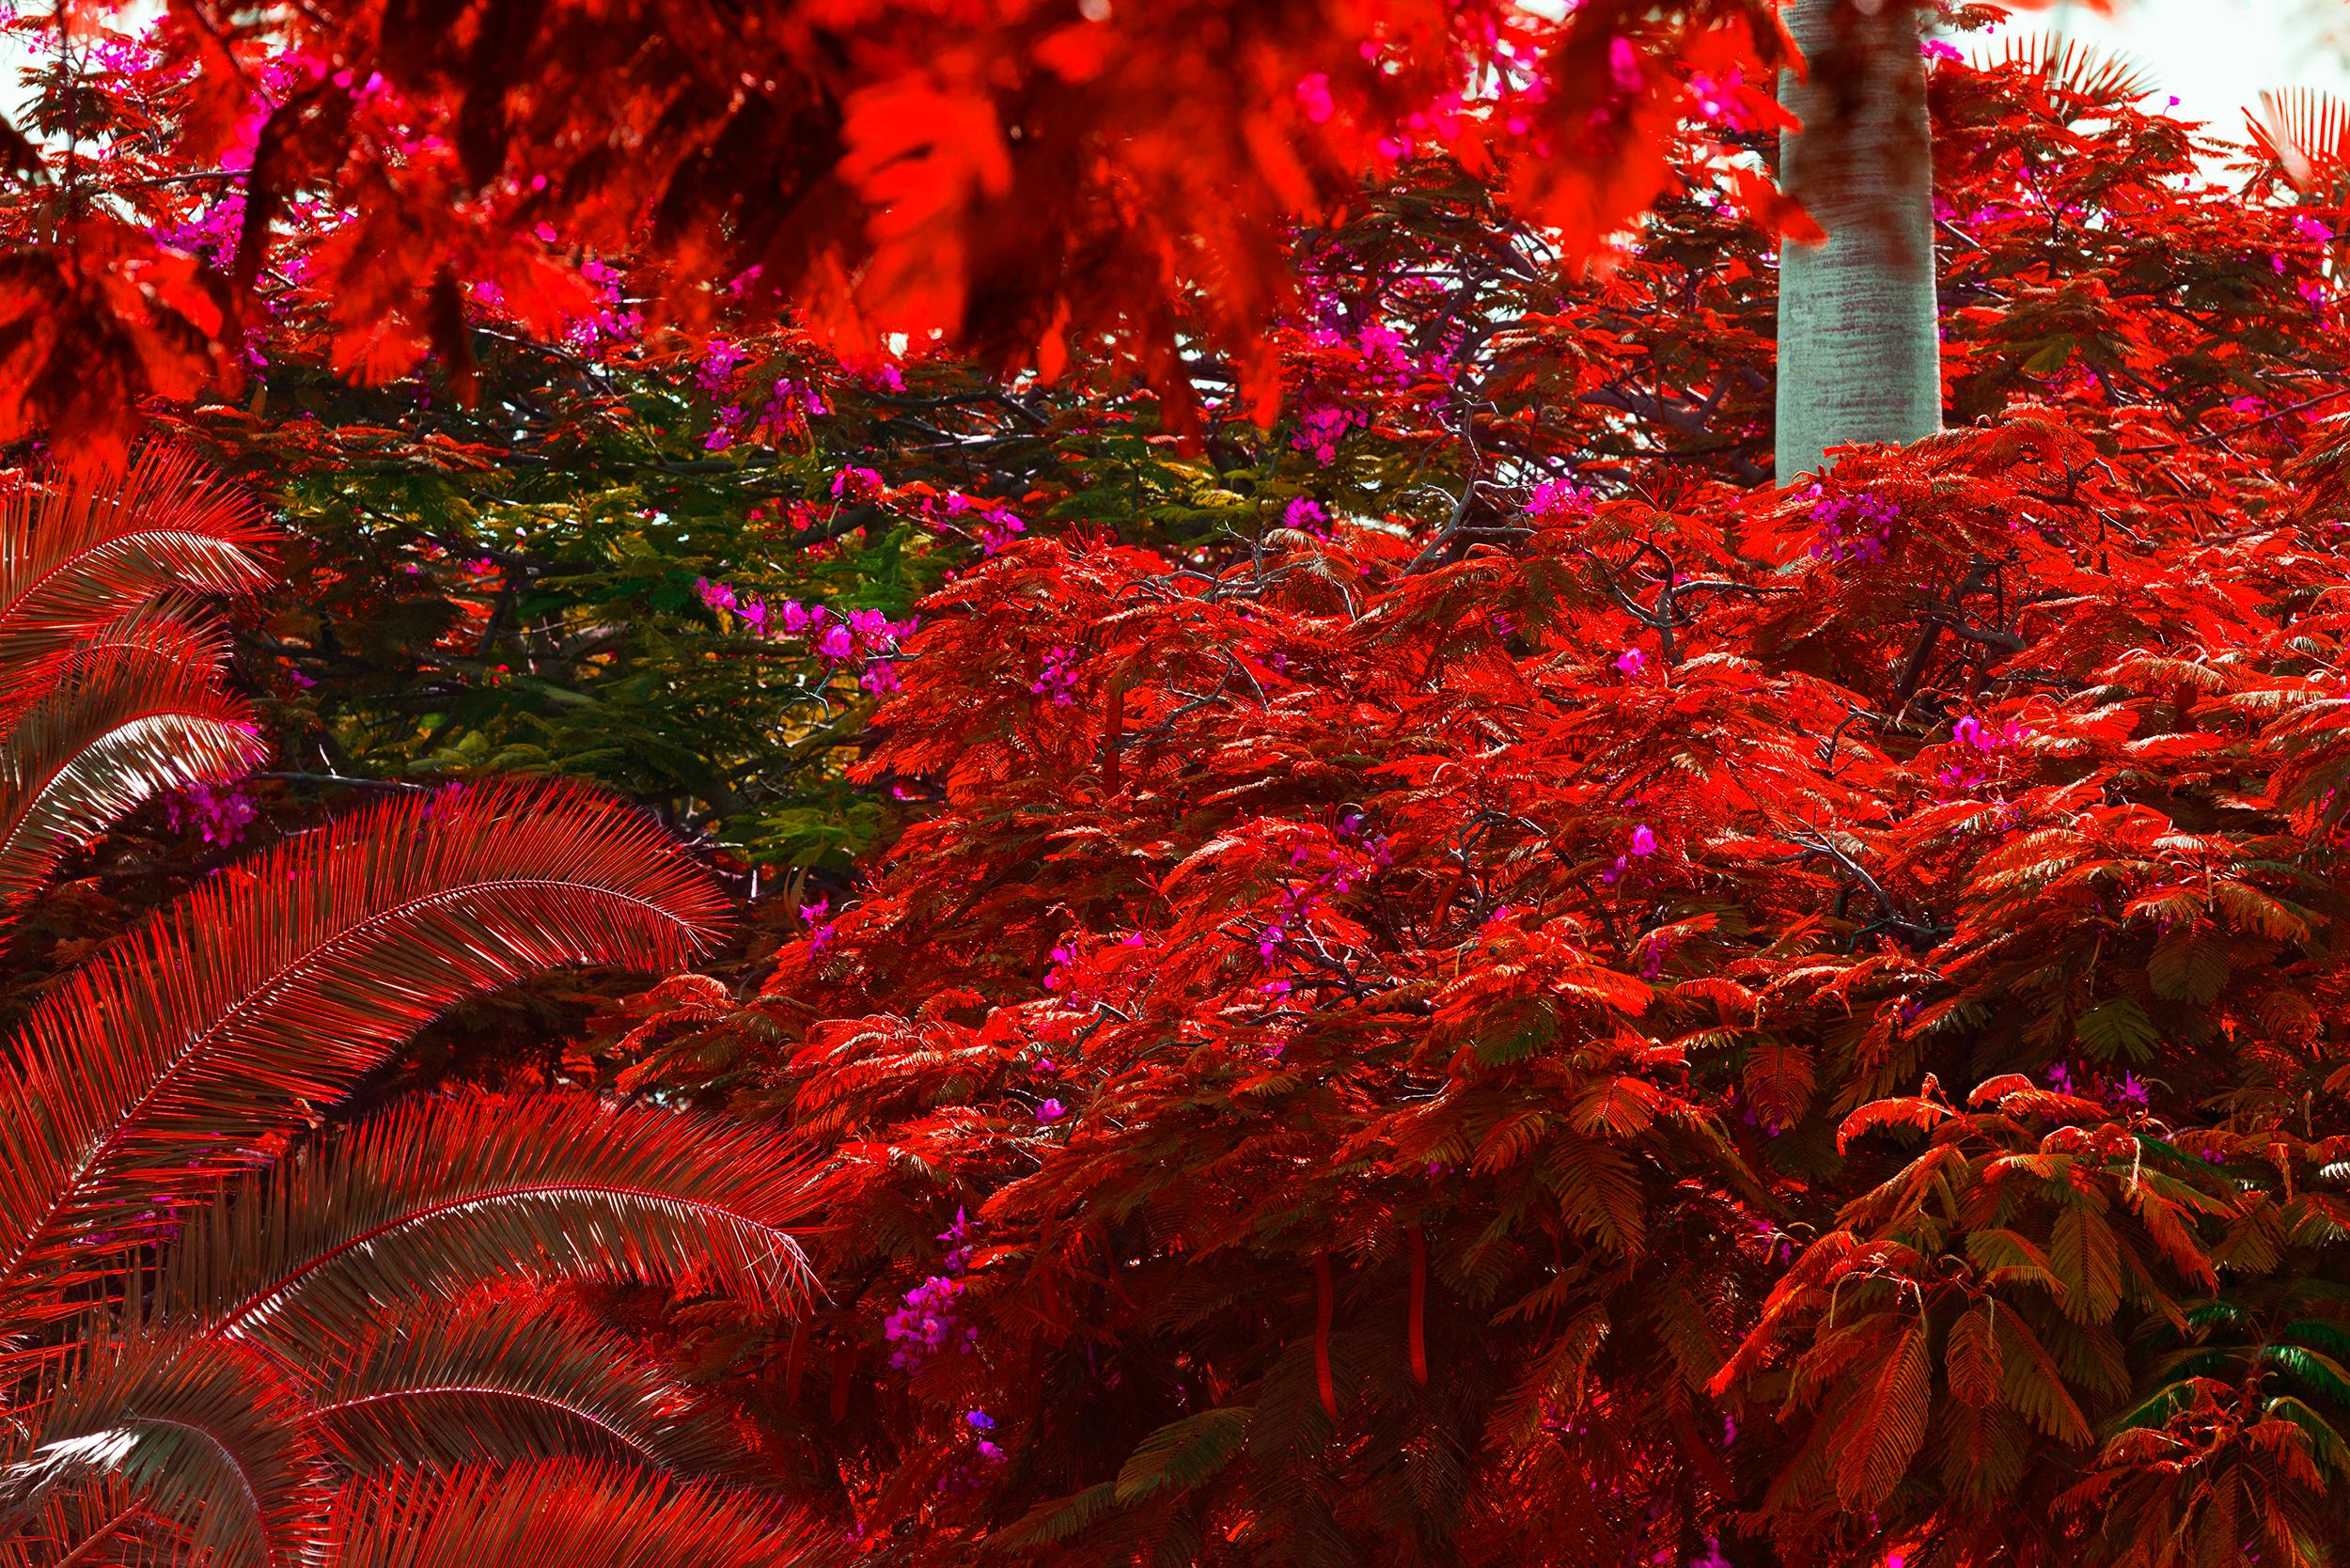 Robert Funk Landscape Photograph – Daydreaming Royal Poincianas in Rosa und Rot